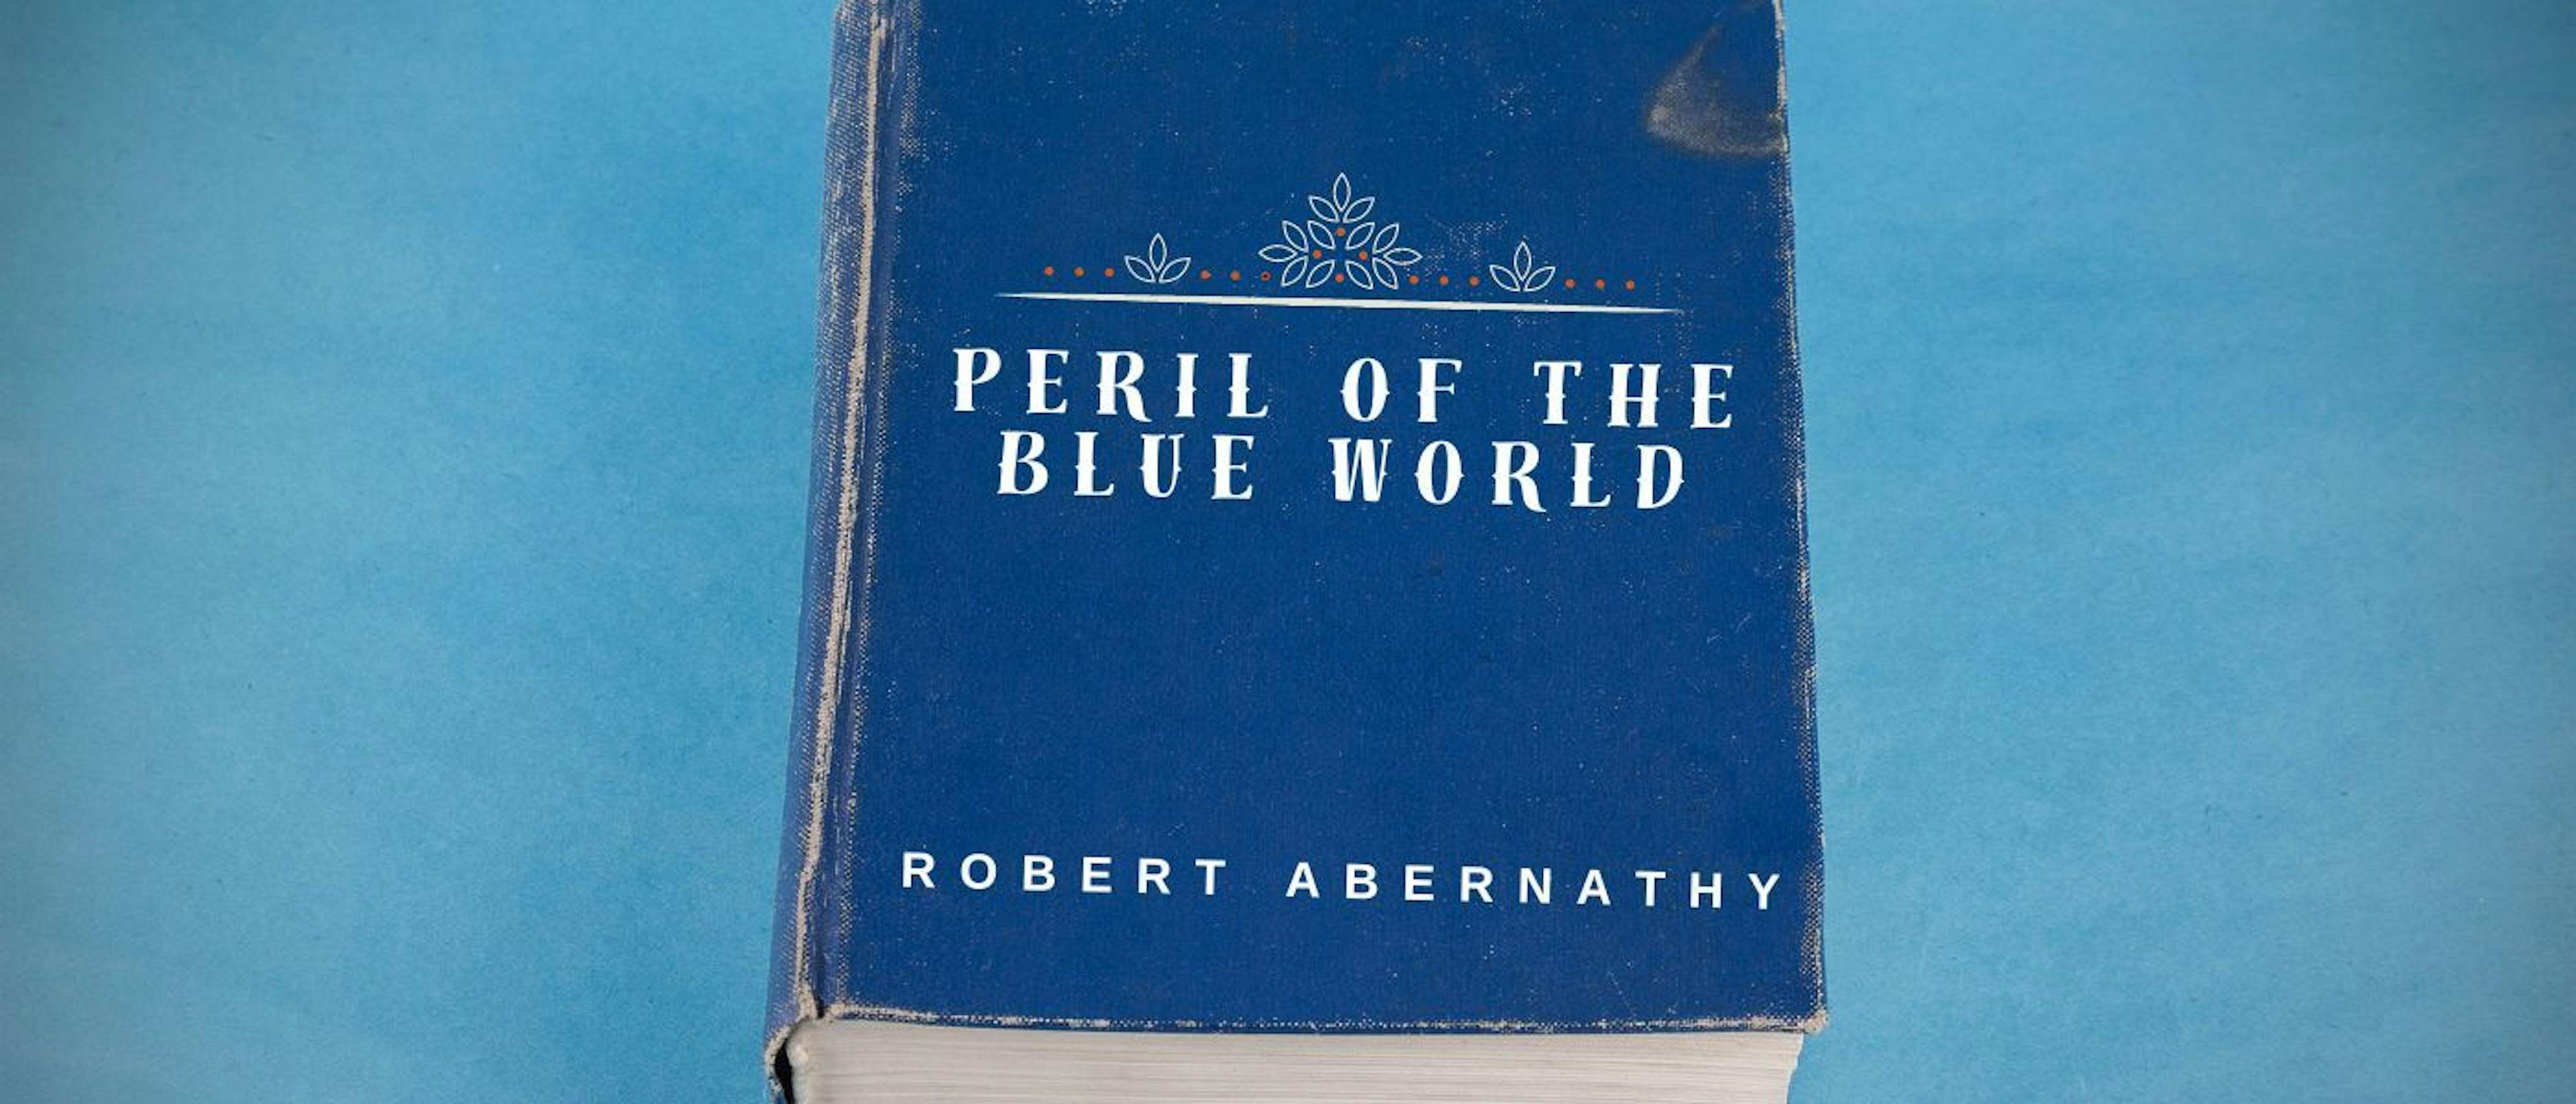 featured image - PERIL OF THE BLUE WORLD